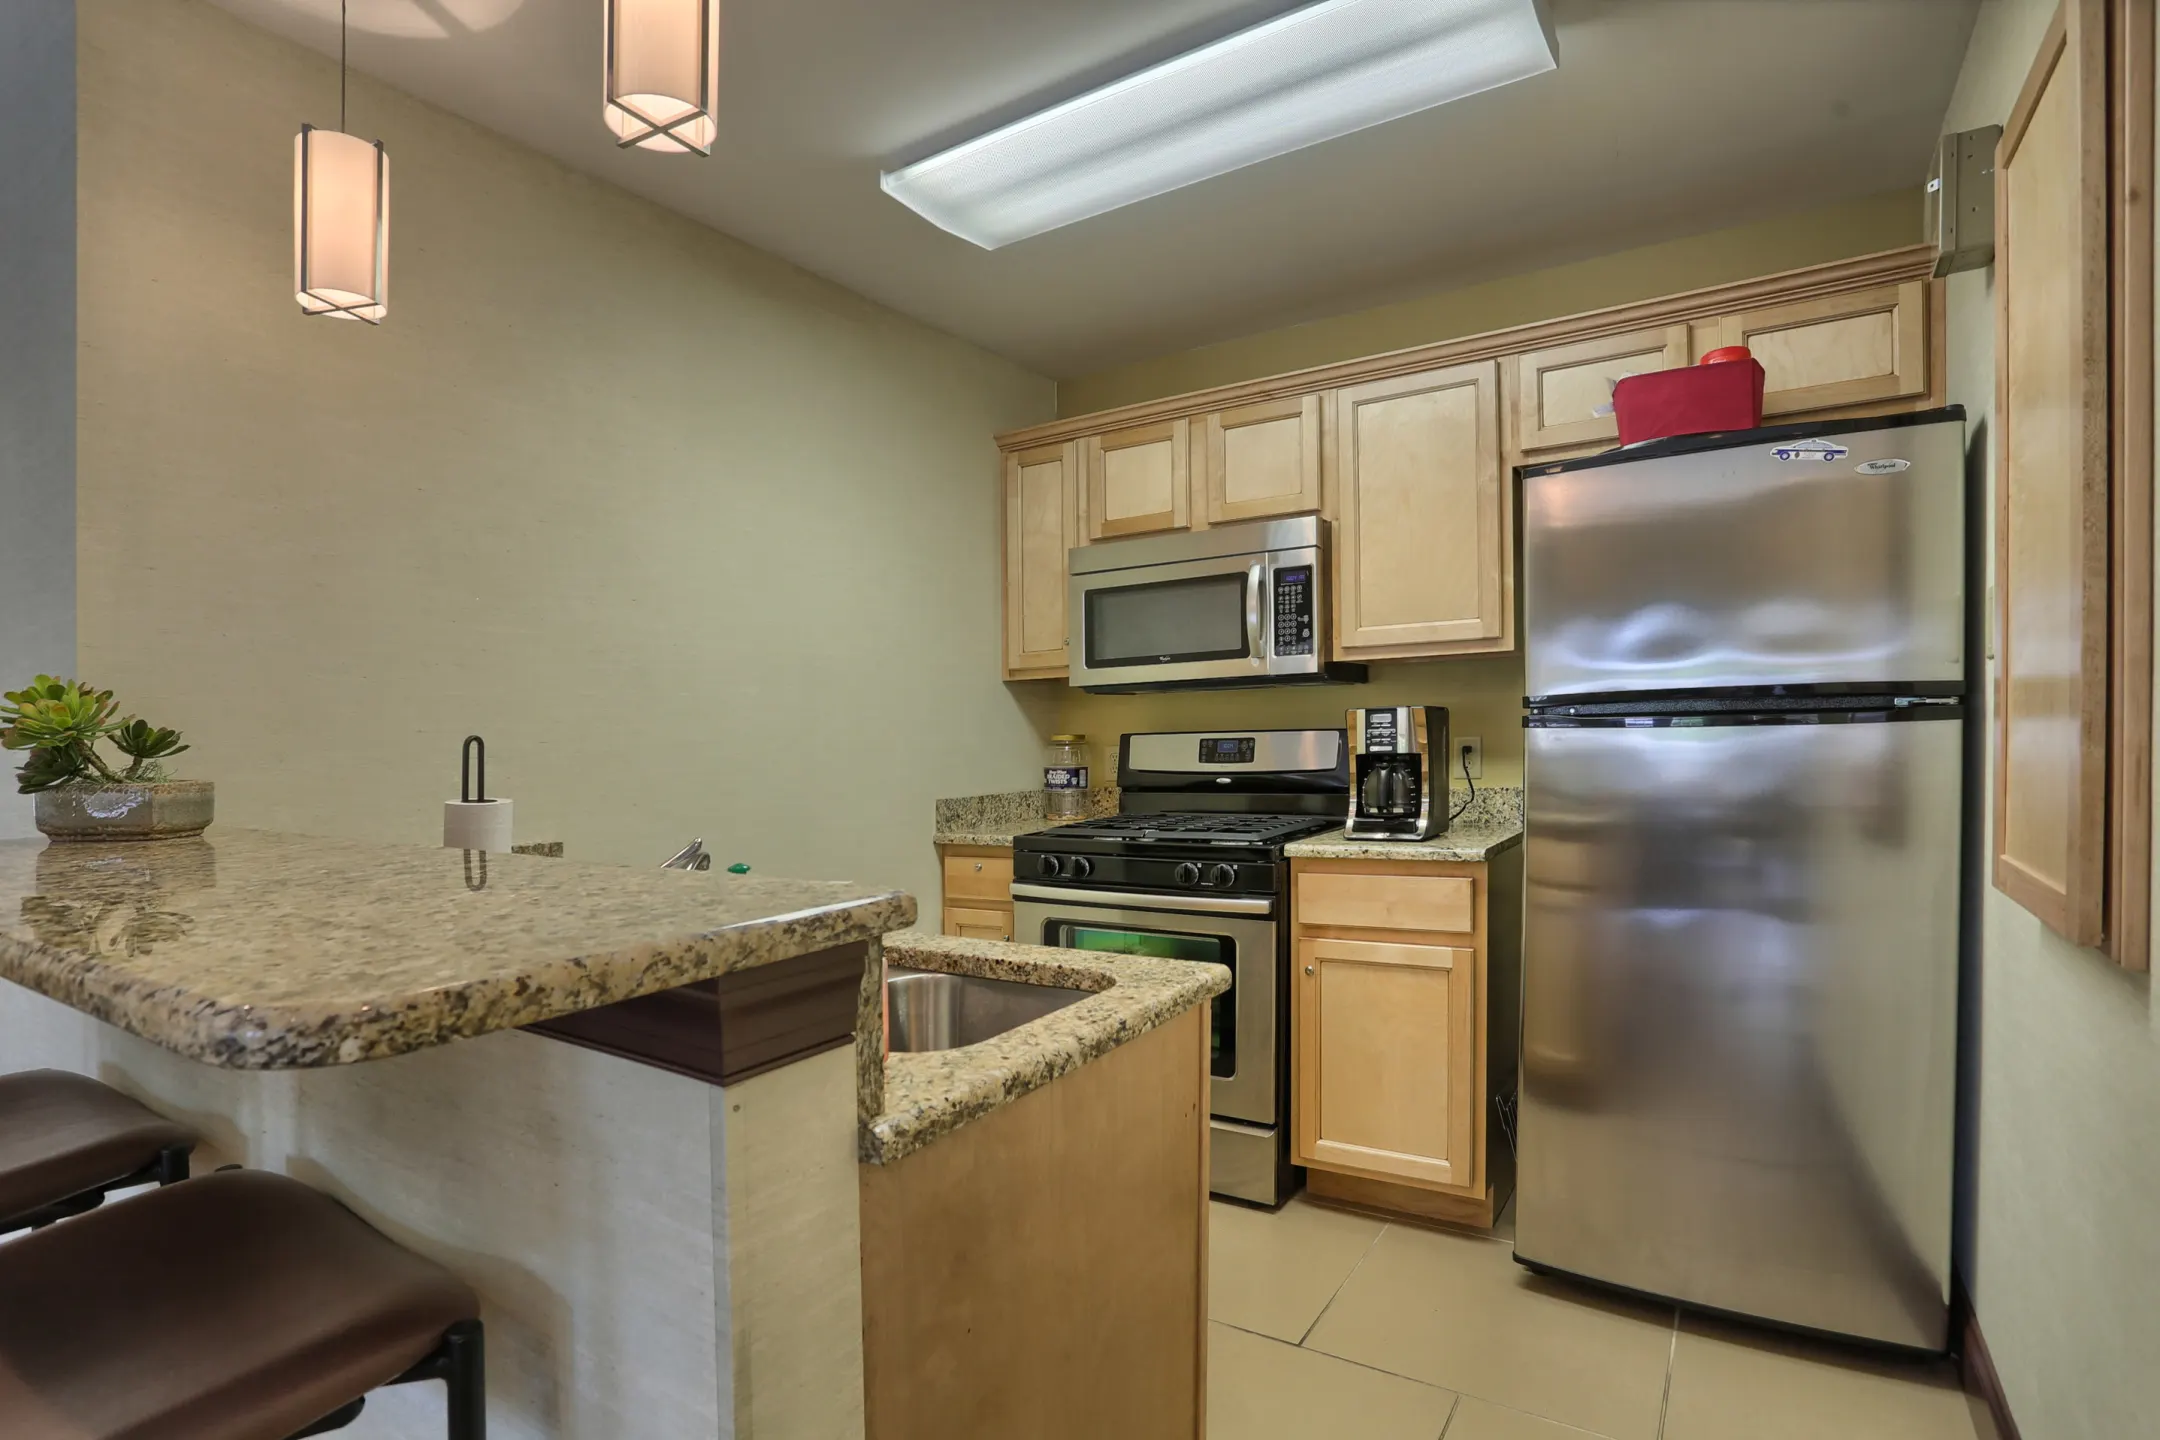 Kitchen - Treeview Apartments - Harrisburg, PA